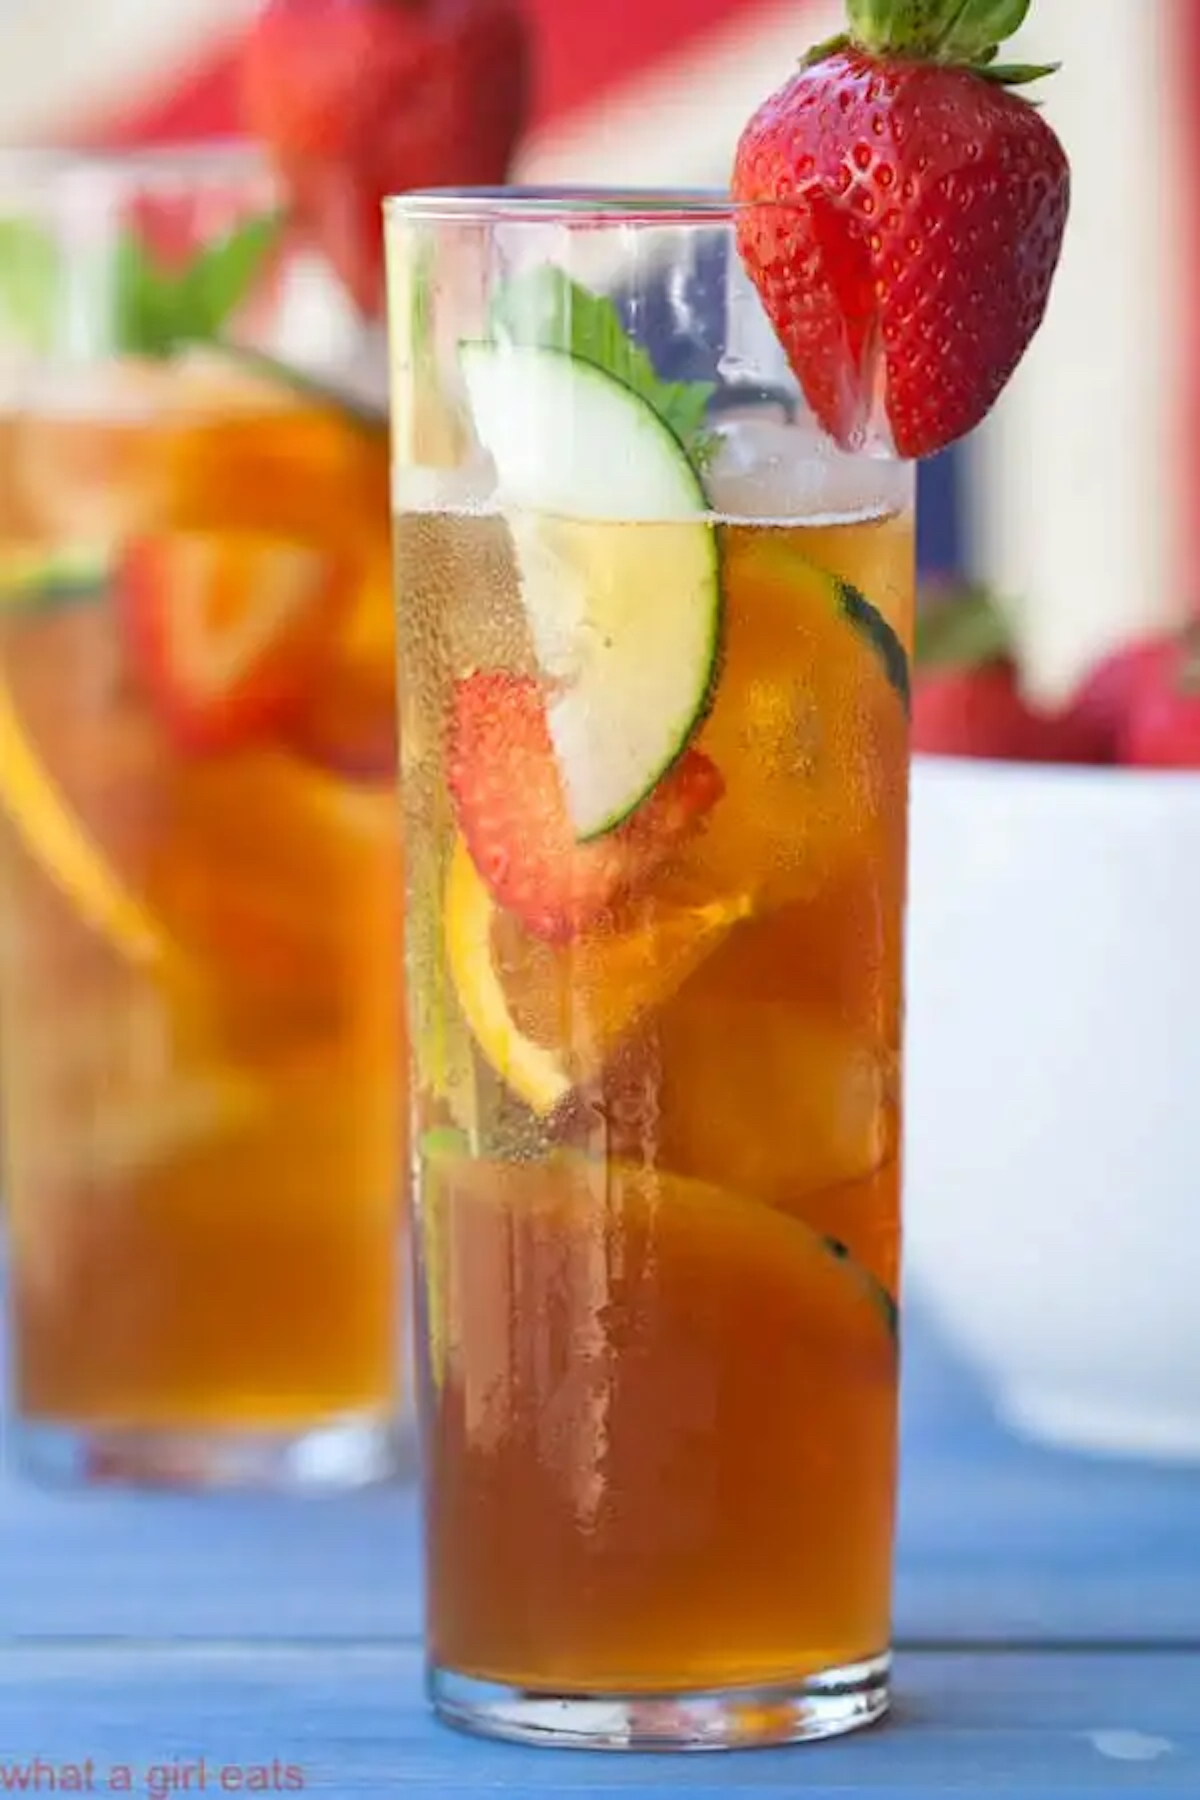 A tall glass filled with Pimm's Cup cocktail and fresh sliced fruit and veggies.